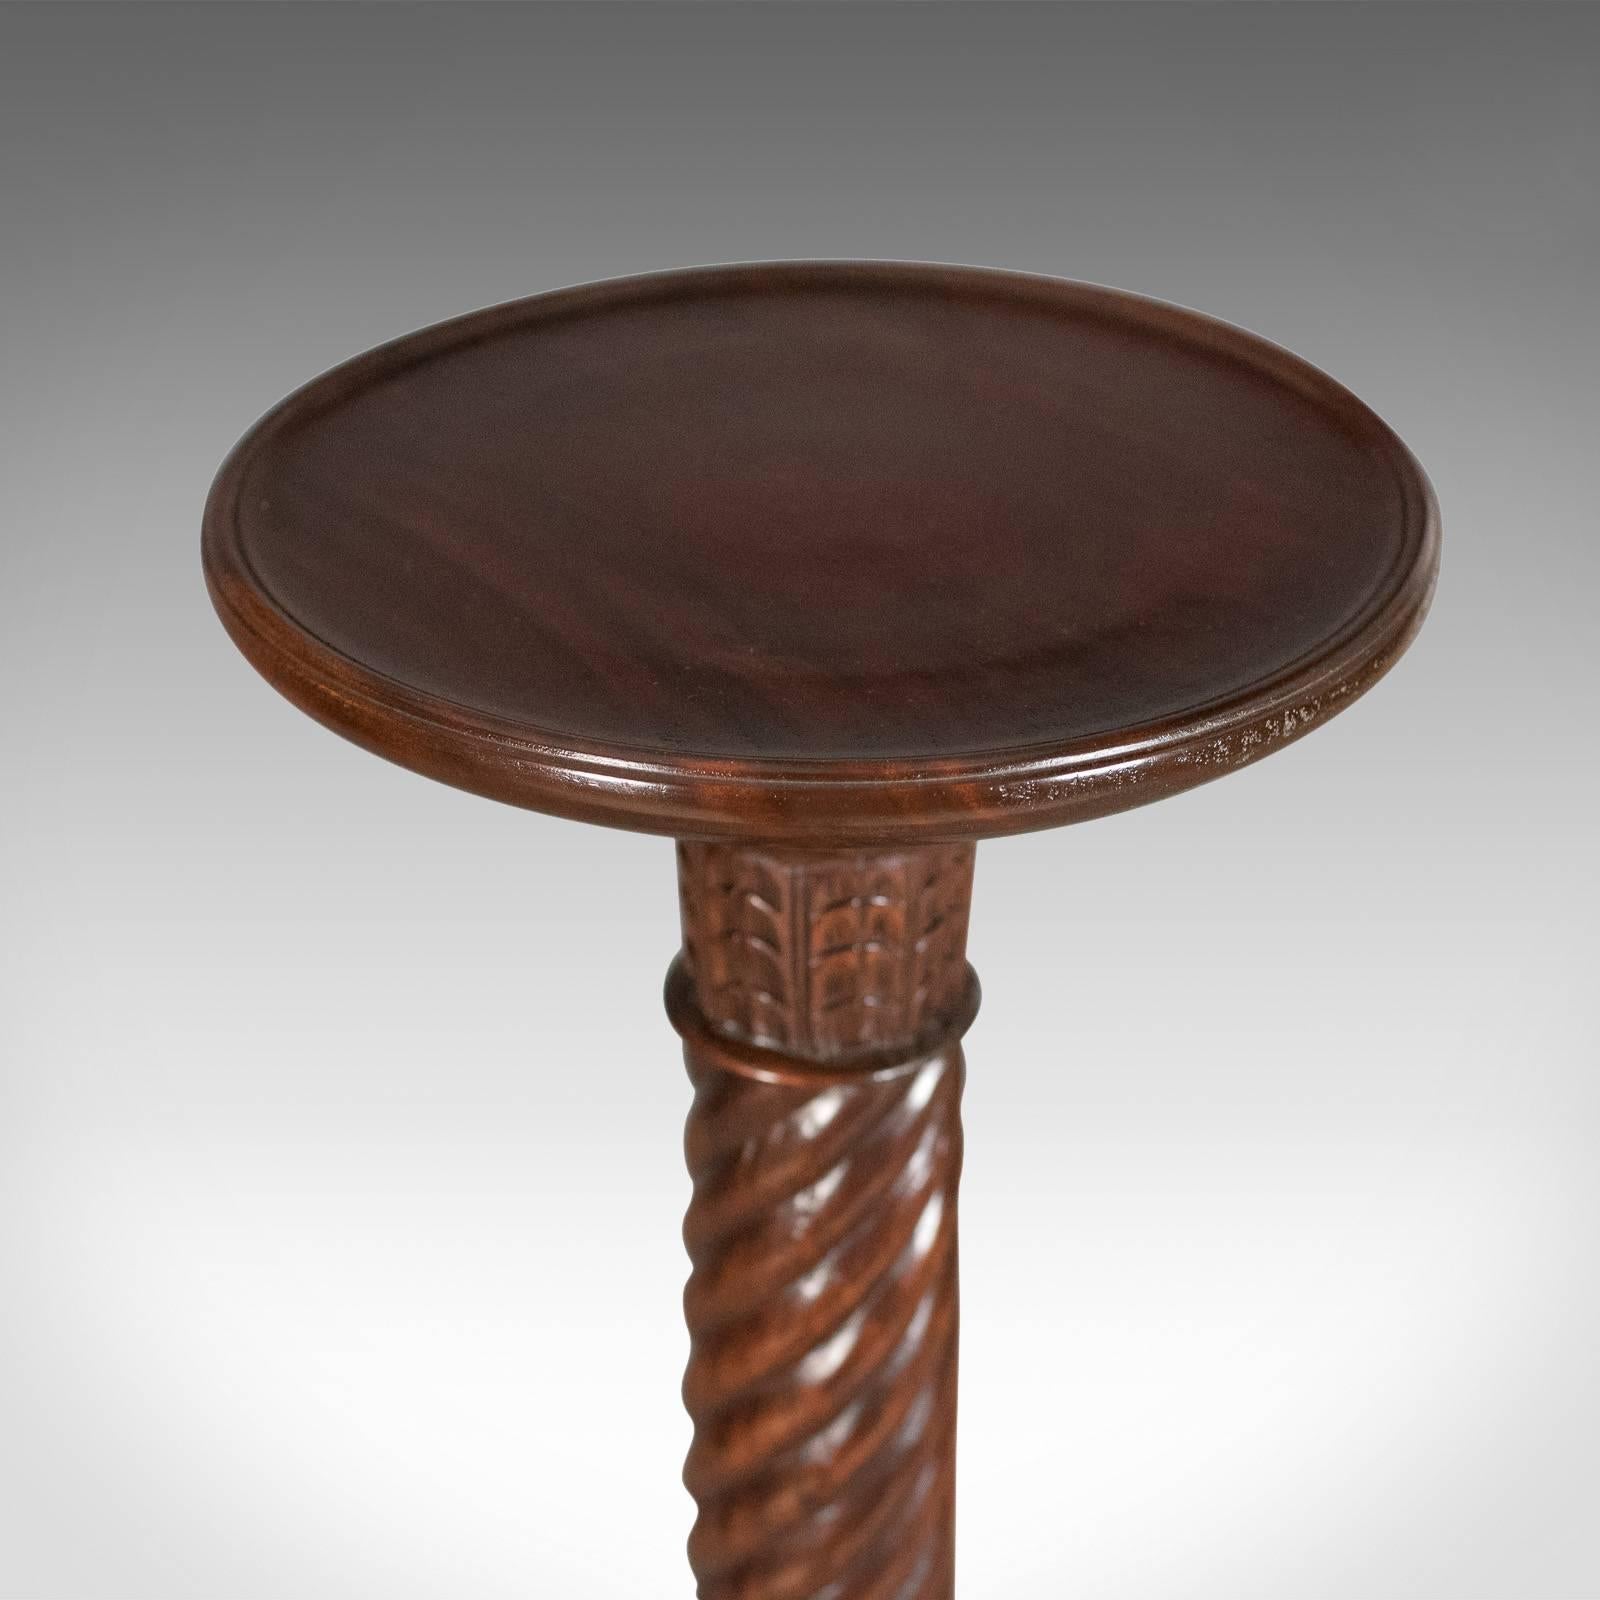 This is a mid-20th century plant stand, a William IV revival torchère in dark mahogany.

Well executed in a quality dark mahogany 
Good color with a lustrous wax polished finish
Robust ring turned baluster column with helical twist

Standing